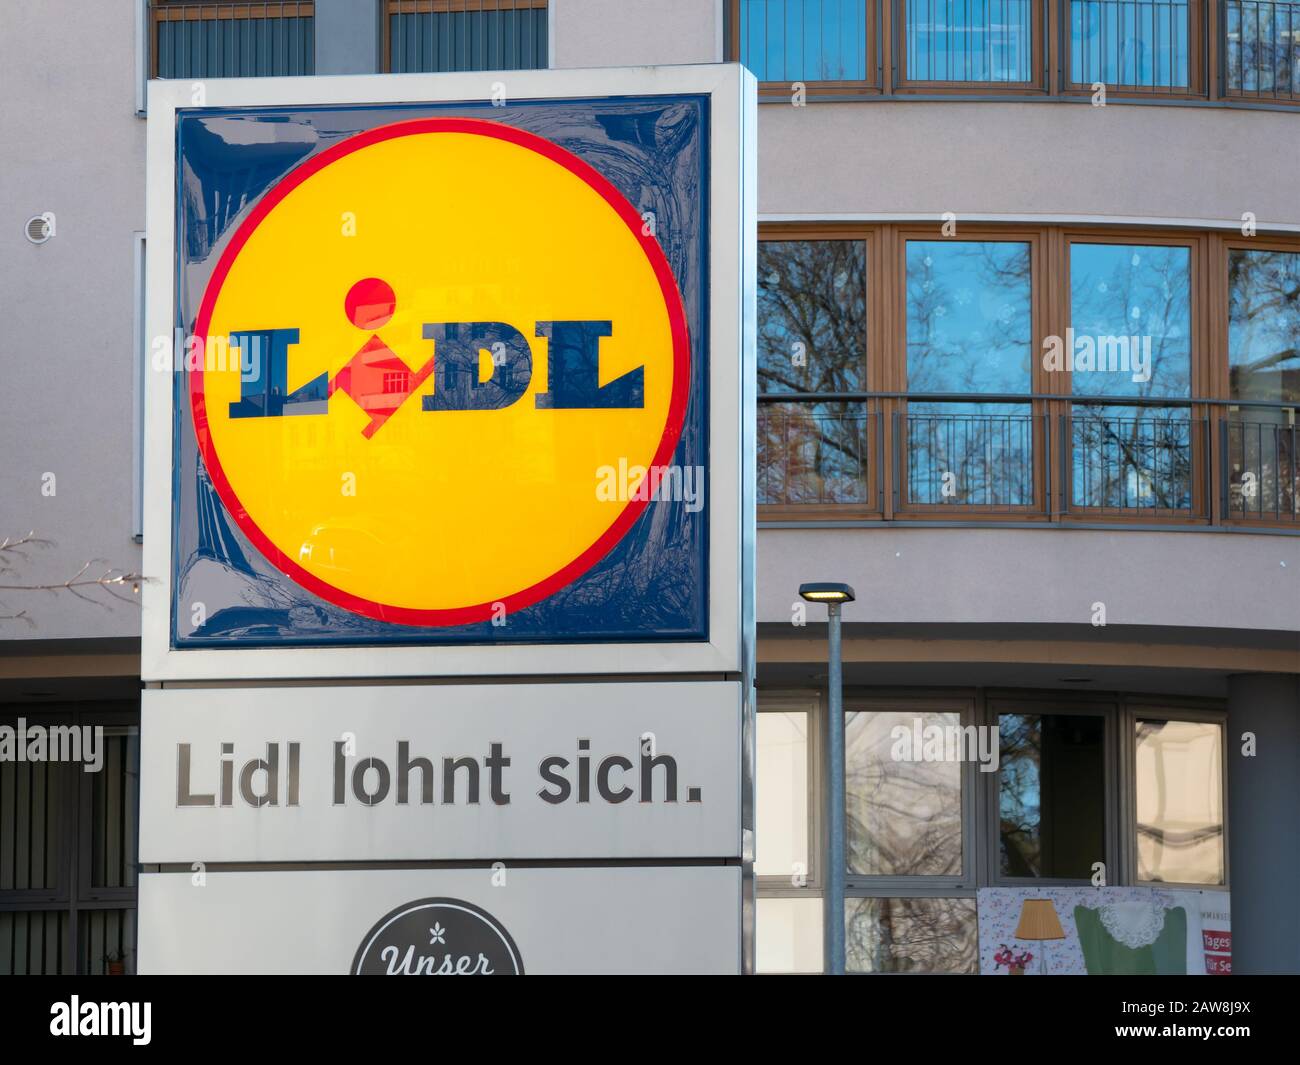 BERLIN, GERMANY - FEBRUARY 4, 2020: Lidl Logo And Slogan At A Supermarket in Berlin, Germany Stock Photo